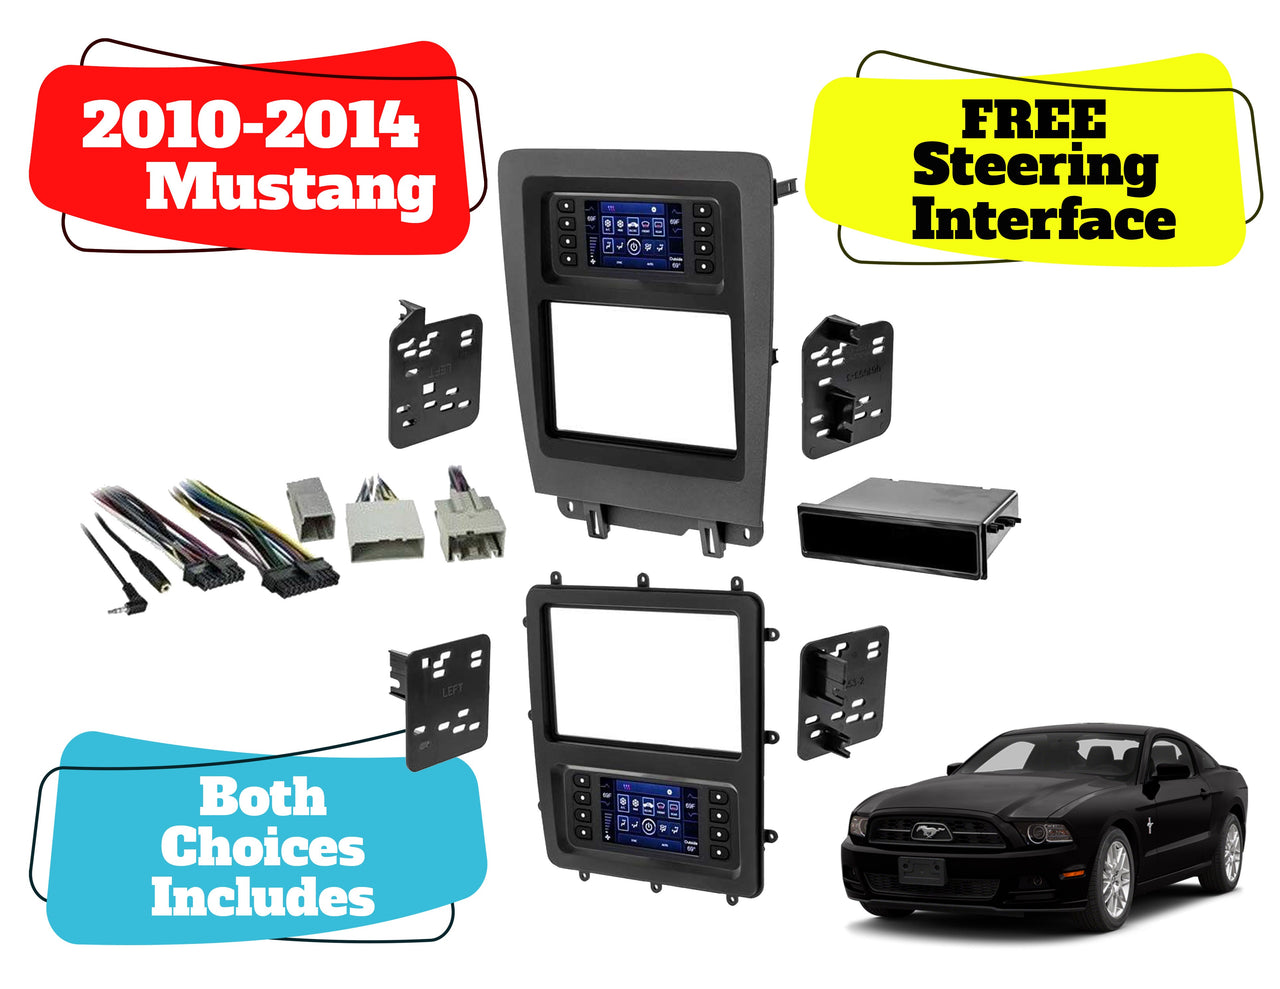 Metra 99-5839CH Charcoal Single/Double DIN Dash Kit for 2010-2014 Ford Mustang